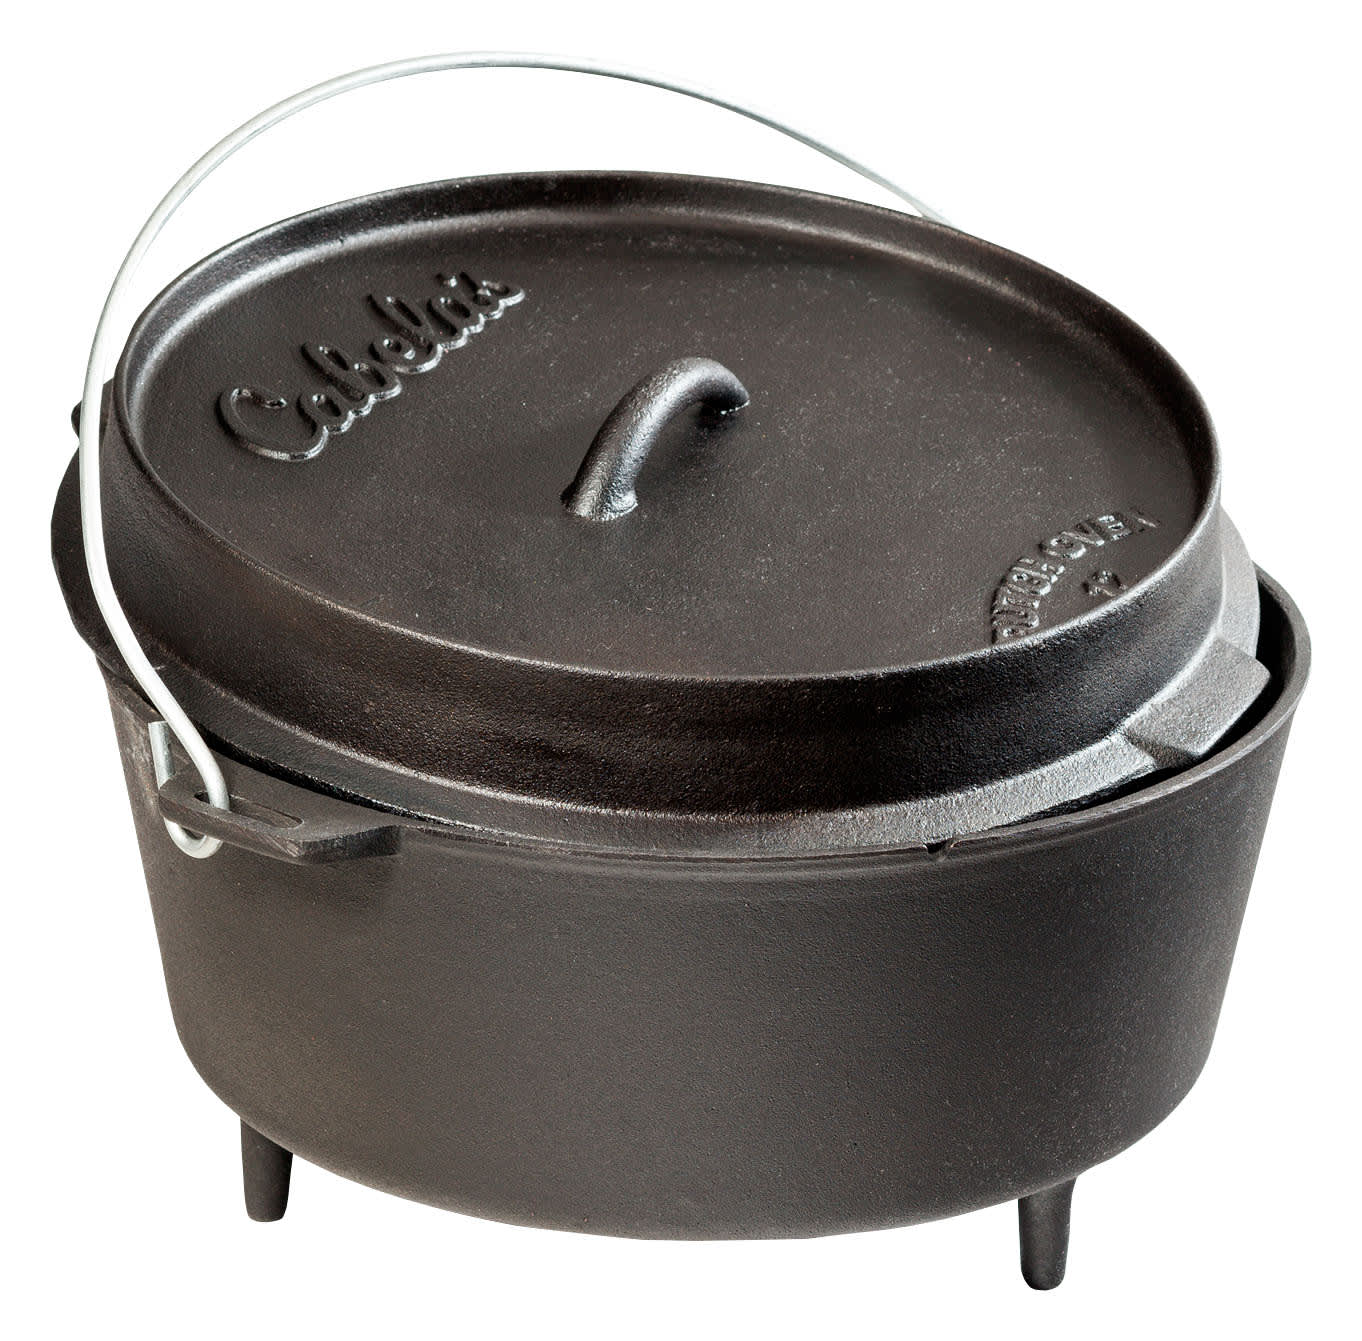 Bayou Classic 4-qt Cast Iron Dutch Oven with Lid - Black, Oven Safe,  Non-Stick, Seasoned for Easy Cleaning and Rust Resistance